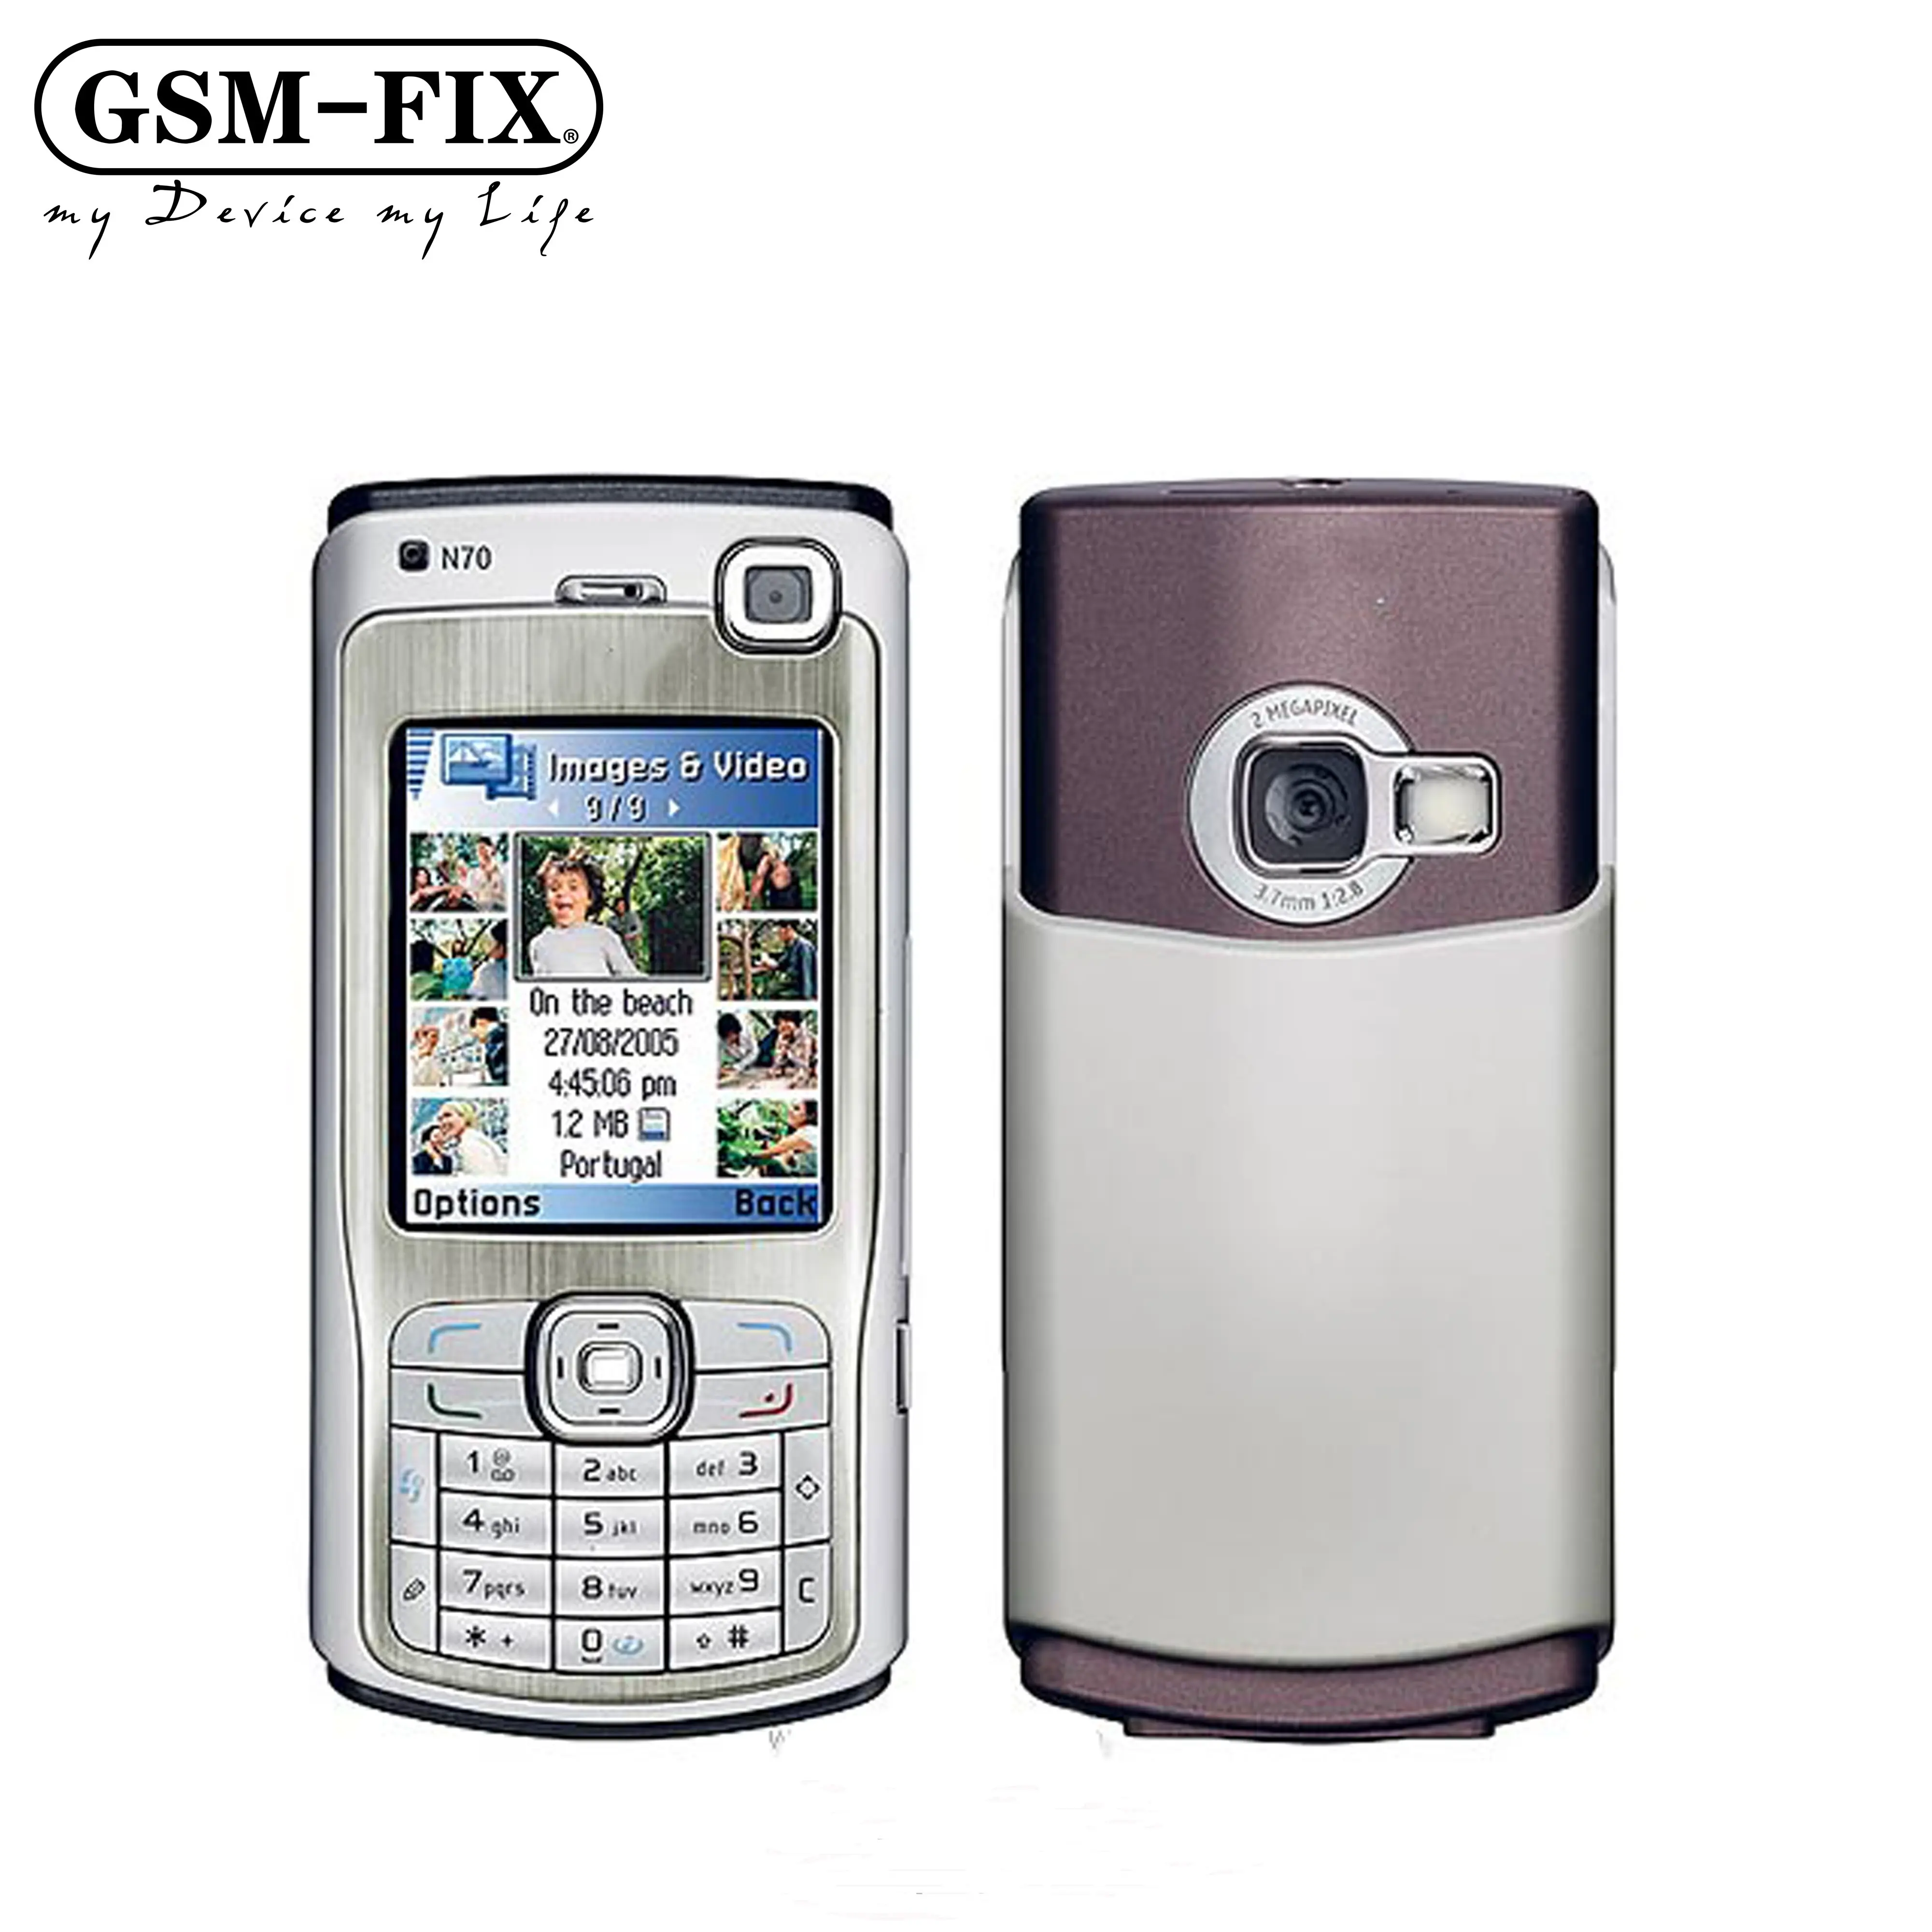 GSM-FIX Hot Selling Cheap Original Simple Classic Bar GSM Mobile Cell Phone On Sale 2.1inch Display For Nokia N70